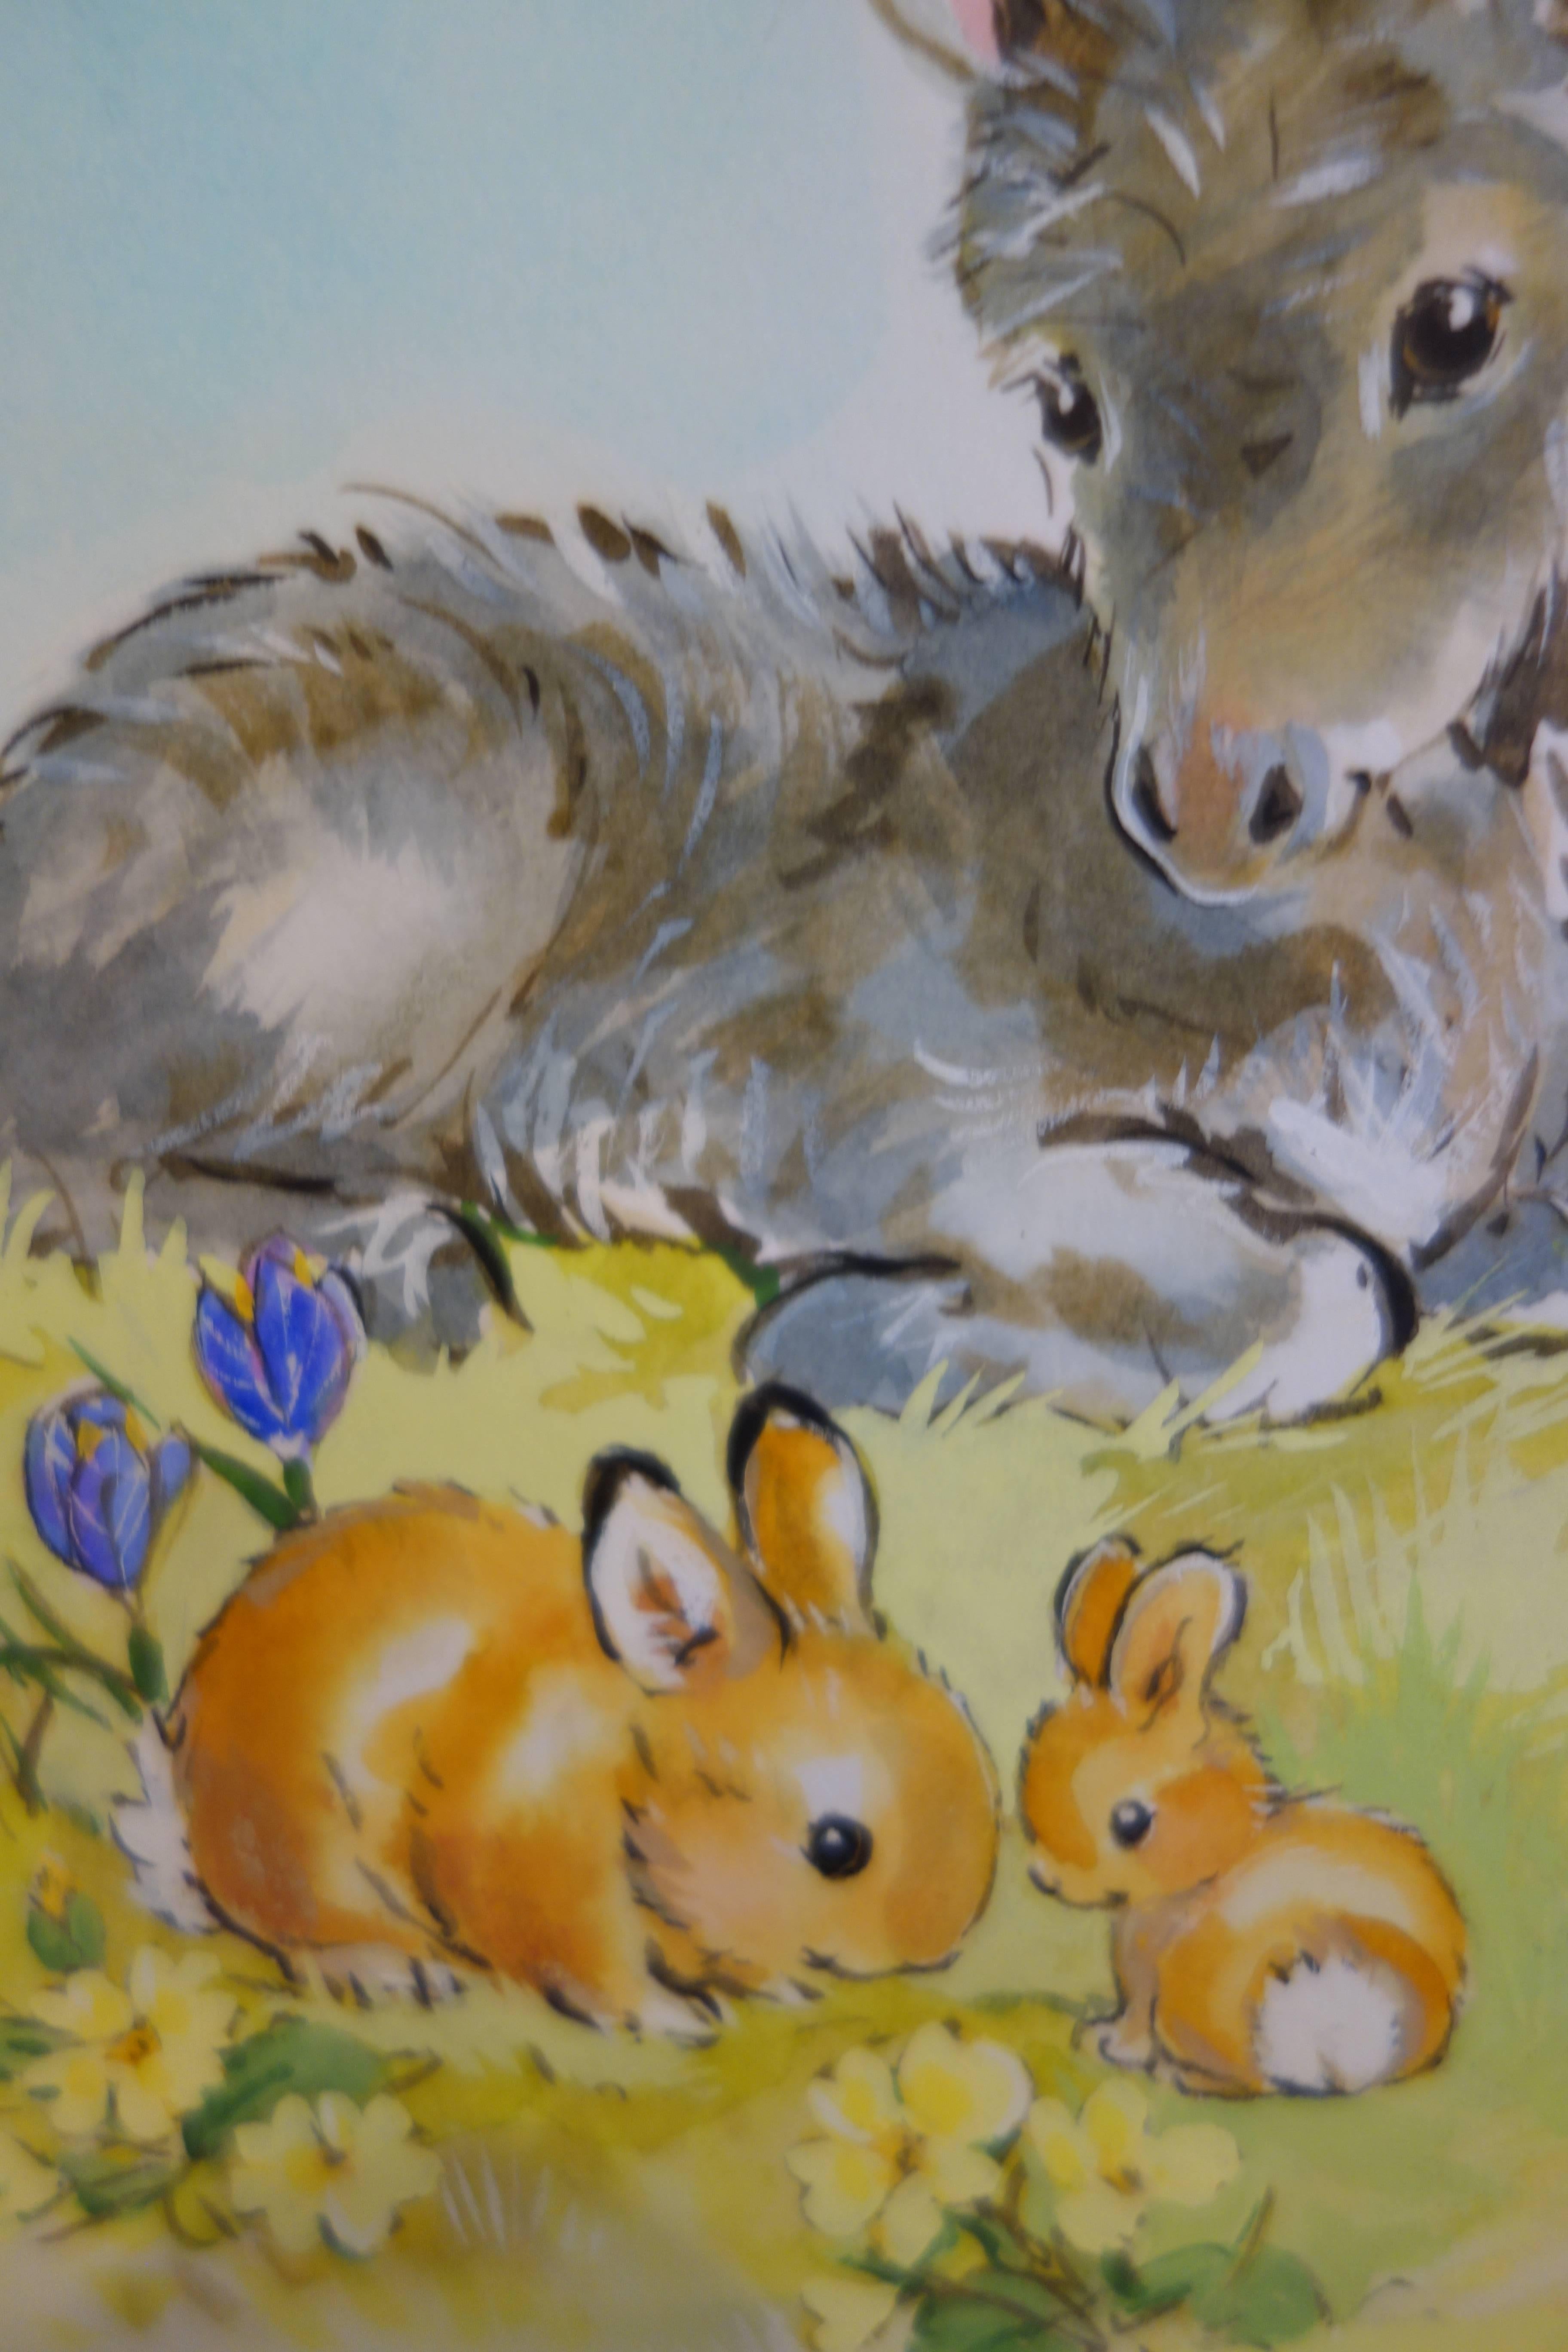 An English scene of a Donkey and Rabbits in a field, with wild flowers - Art by Diana Matthes